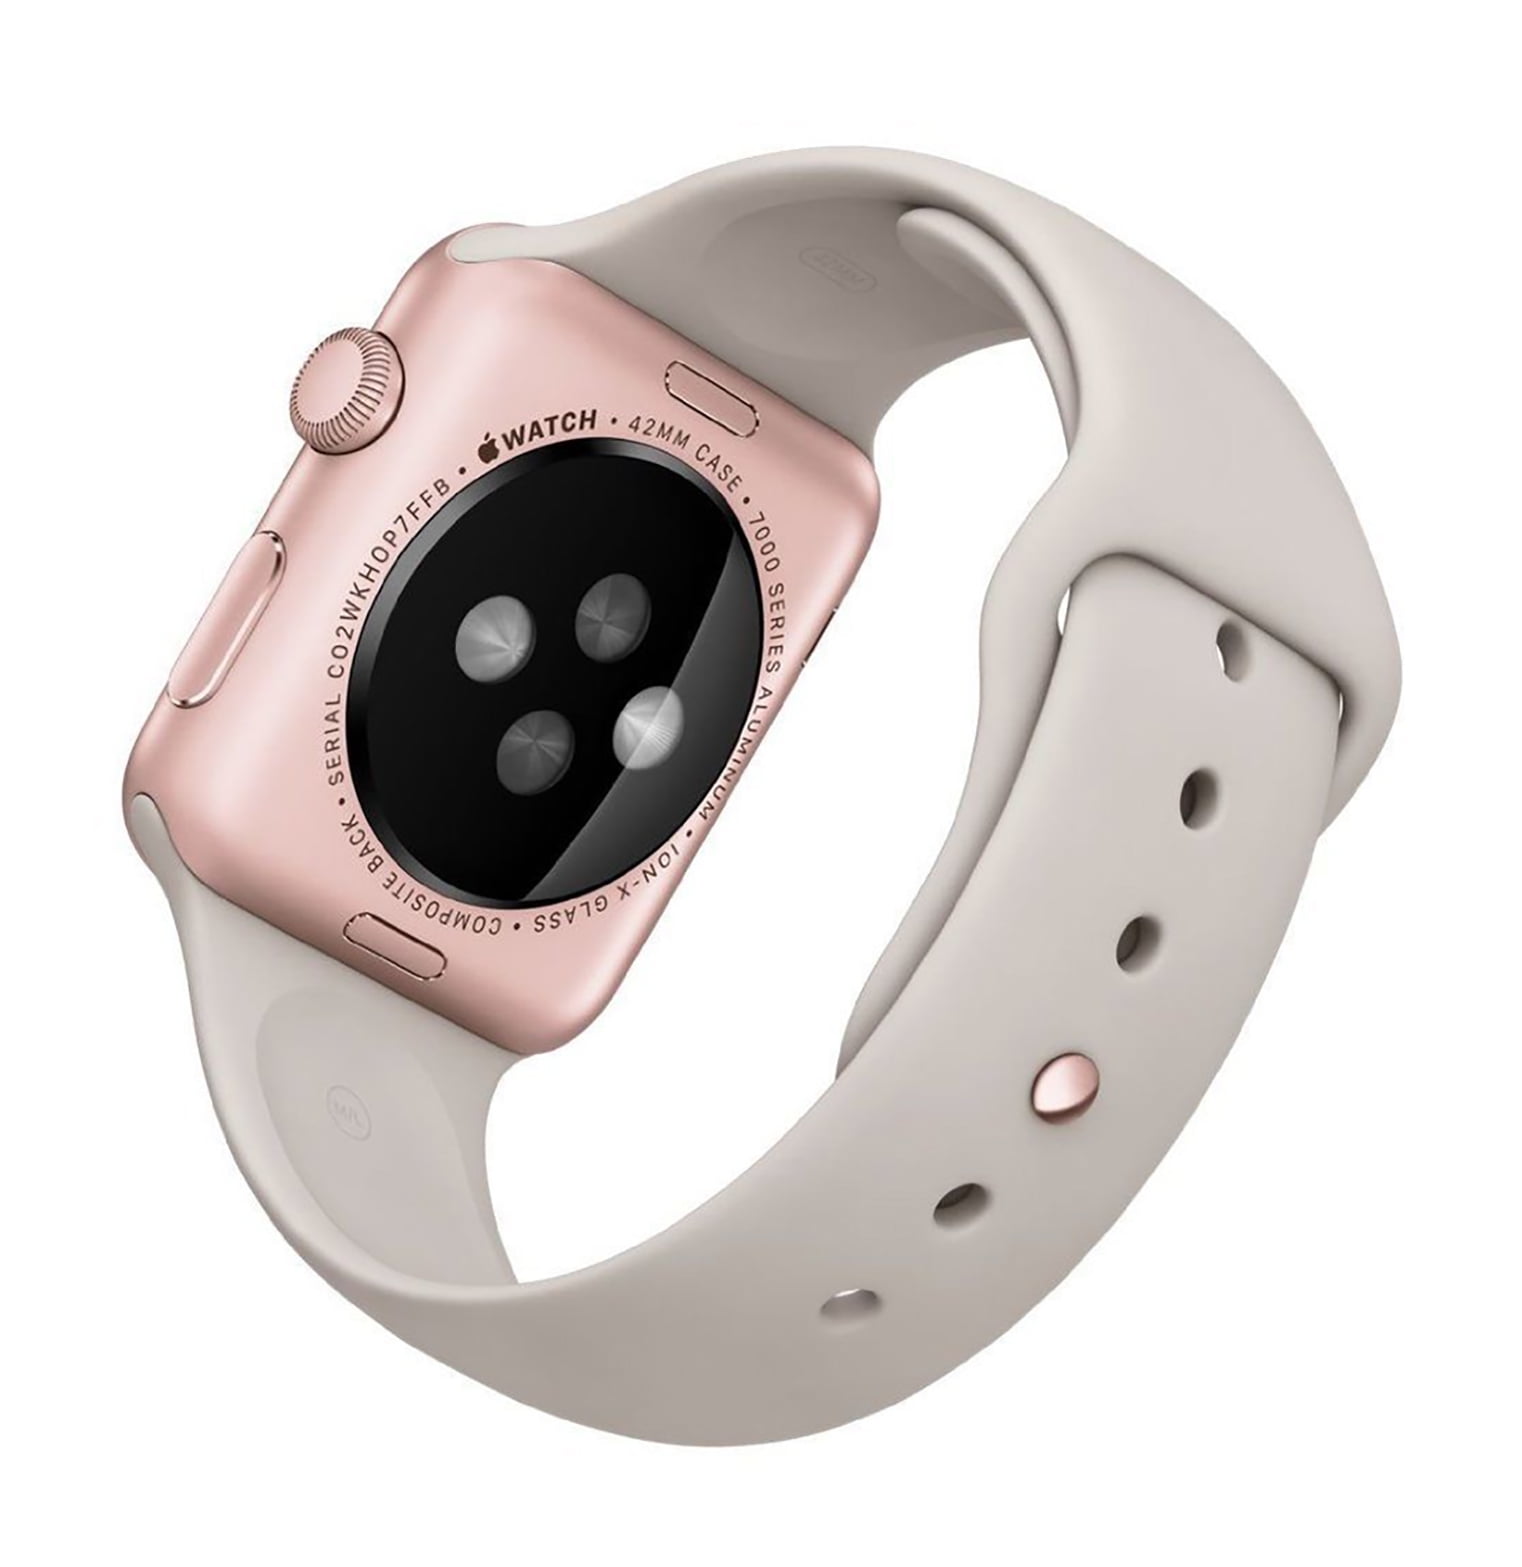 Apple series 3 42mm. Apple Series 1 (42mm). Apple watch Series 1 42mm. Apple watch Sport 42mm. Apple watch Series 1 42мм with Sport Band.